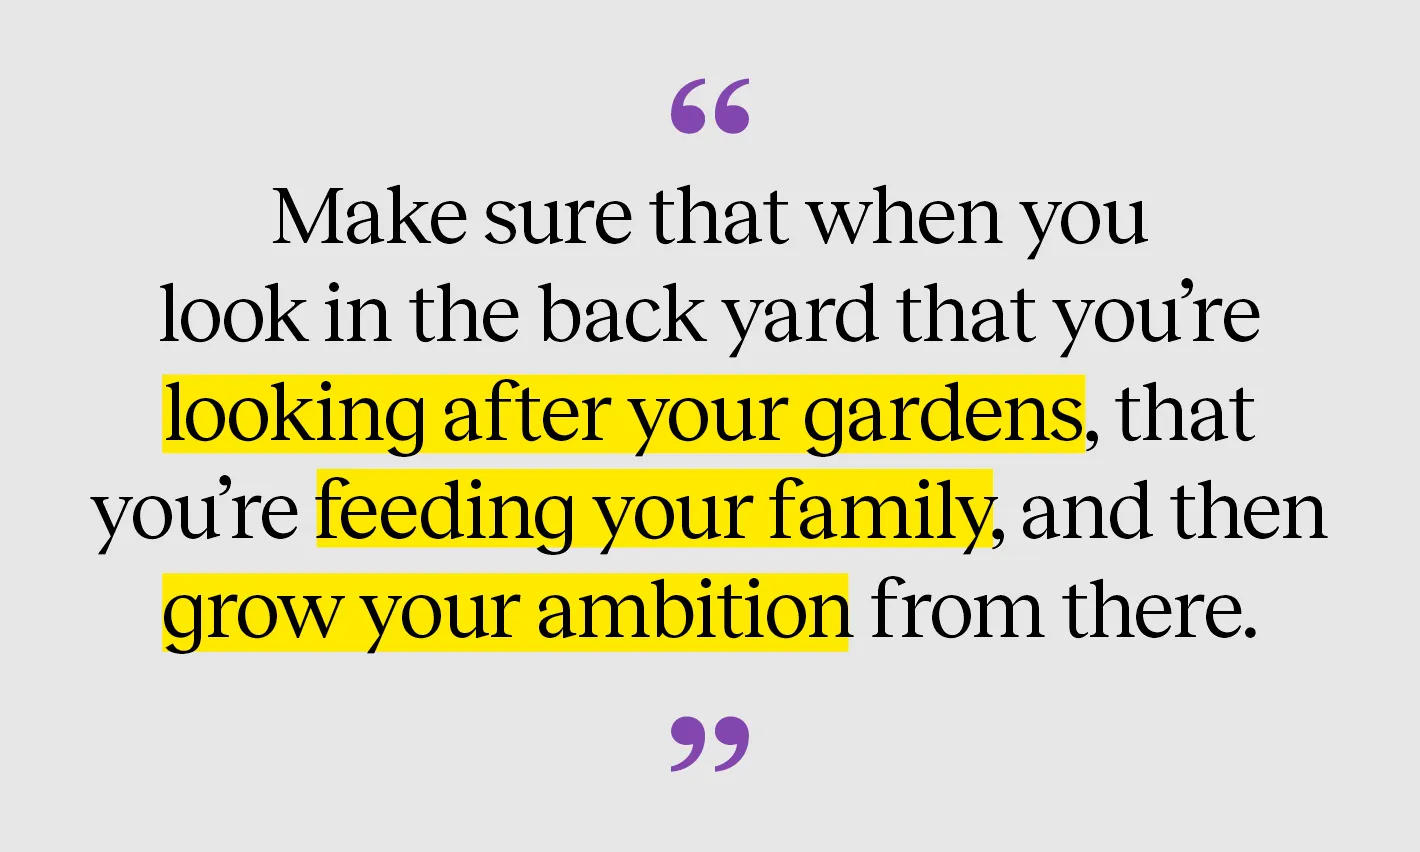 Make sure that when you look in the back yard that you're looking after your gardens, that you're feeding your family, and then grow your ambition from there.